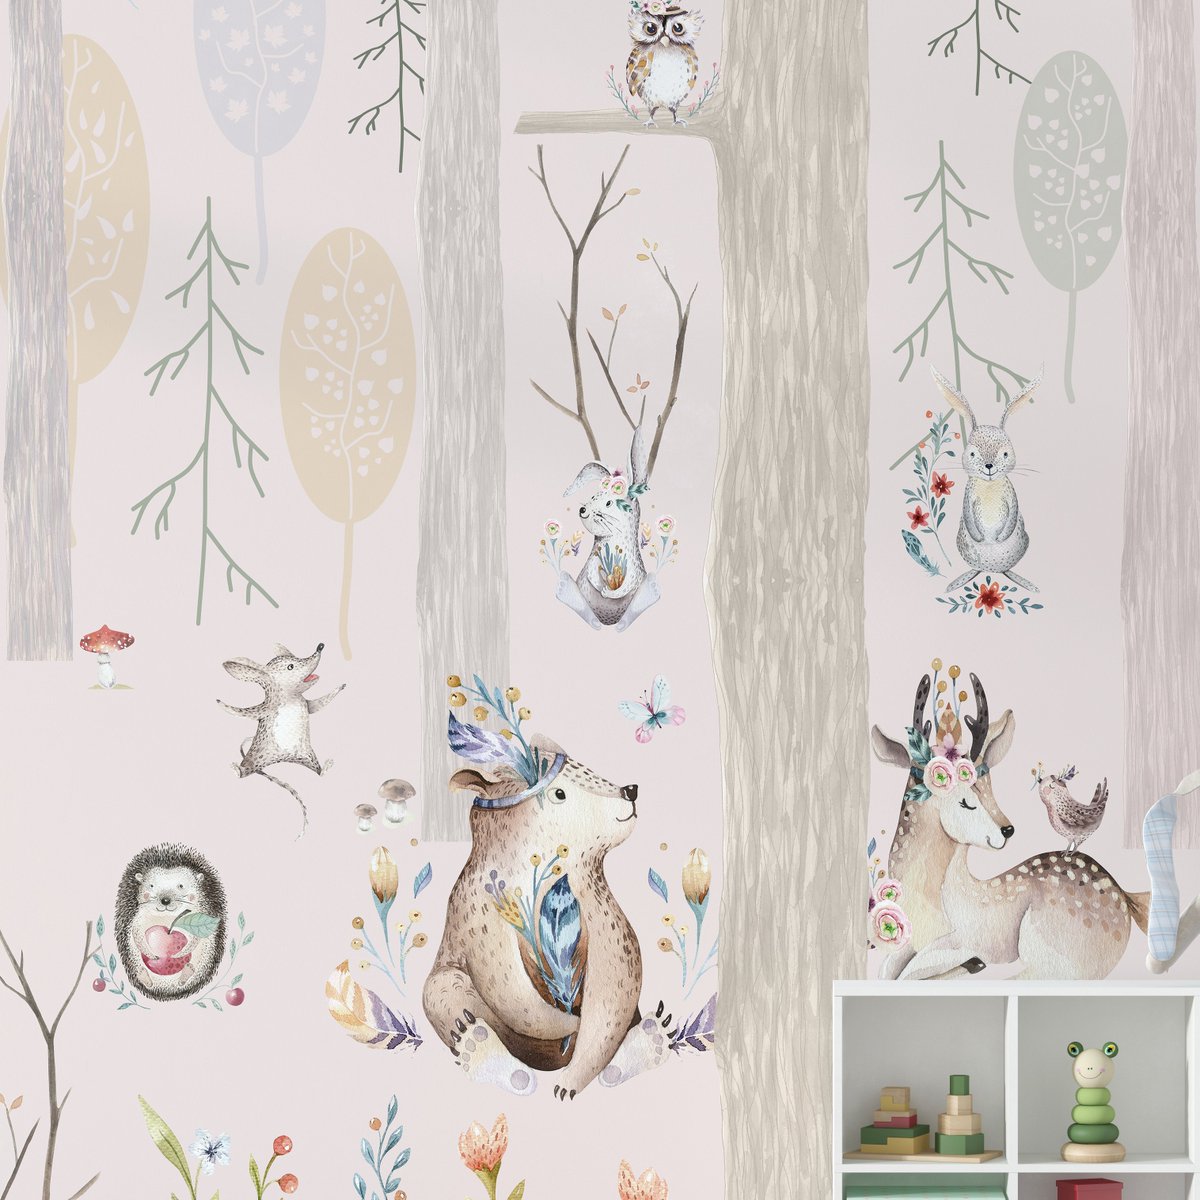 Mystical Pink Color Forest Wallpaper Mural
 
bit.ly/3CtMuxd

#MysticalForest #PinkColorPalette #EnchantedVibes #removablewallpaper #peelandstickwallpaper #wallpaperforwalls #selfadhesivewallpaper #wallmurals #walldecor🌺🧚‍♀️💖